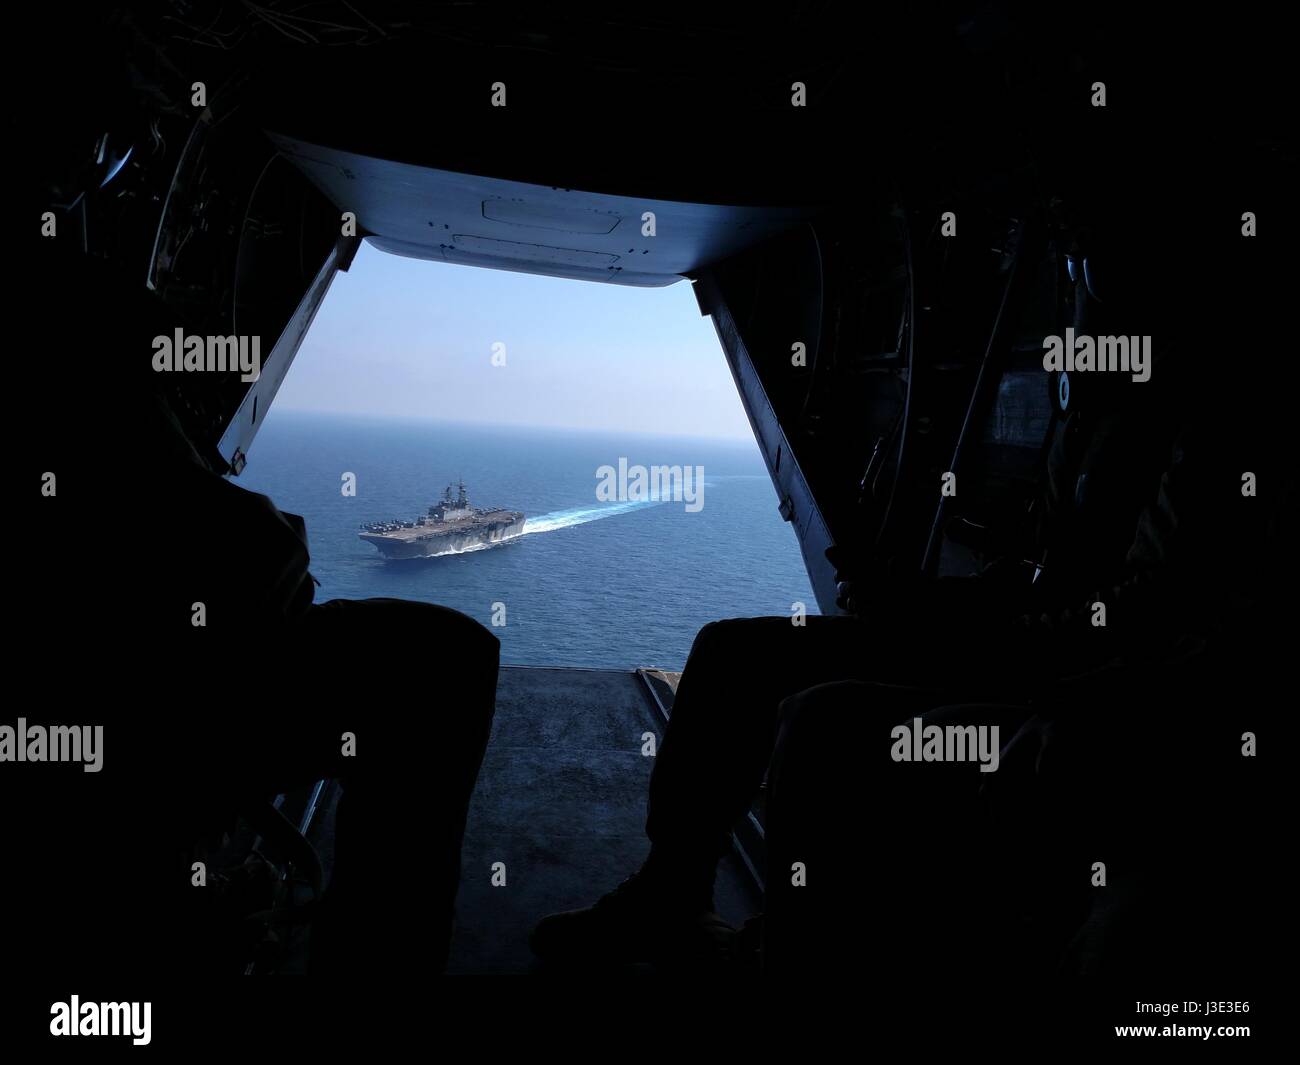 The USN Wasp-class amphibious assault ship USS Bataan steams underway as seen from the back of a USMC MV-22B Osprey assault support aircraft March 23, 2017 in the Mediterranean Sea.    (photo by Sherrie Flippin /US Navy  via Planetpix) Stock Photo